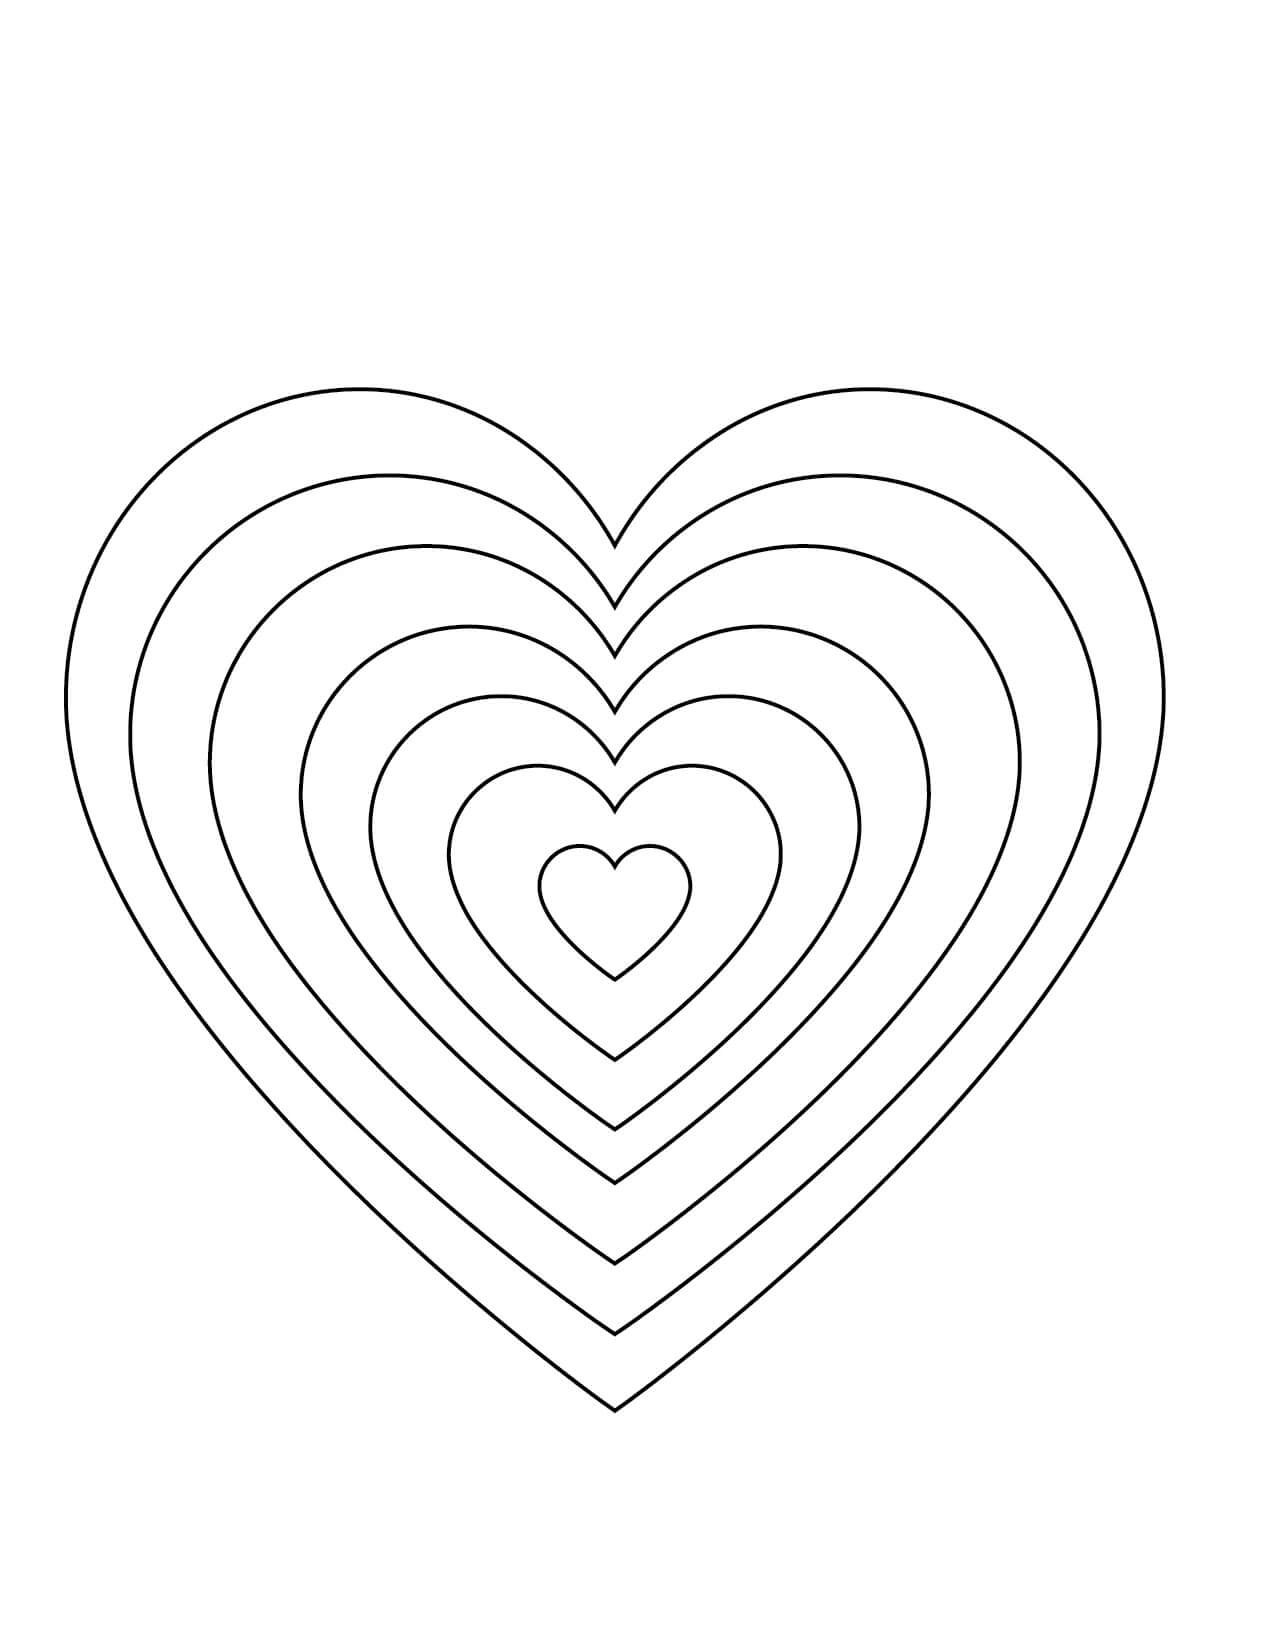 Rainbow heart coloring page